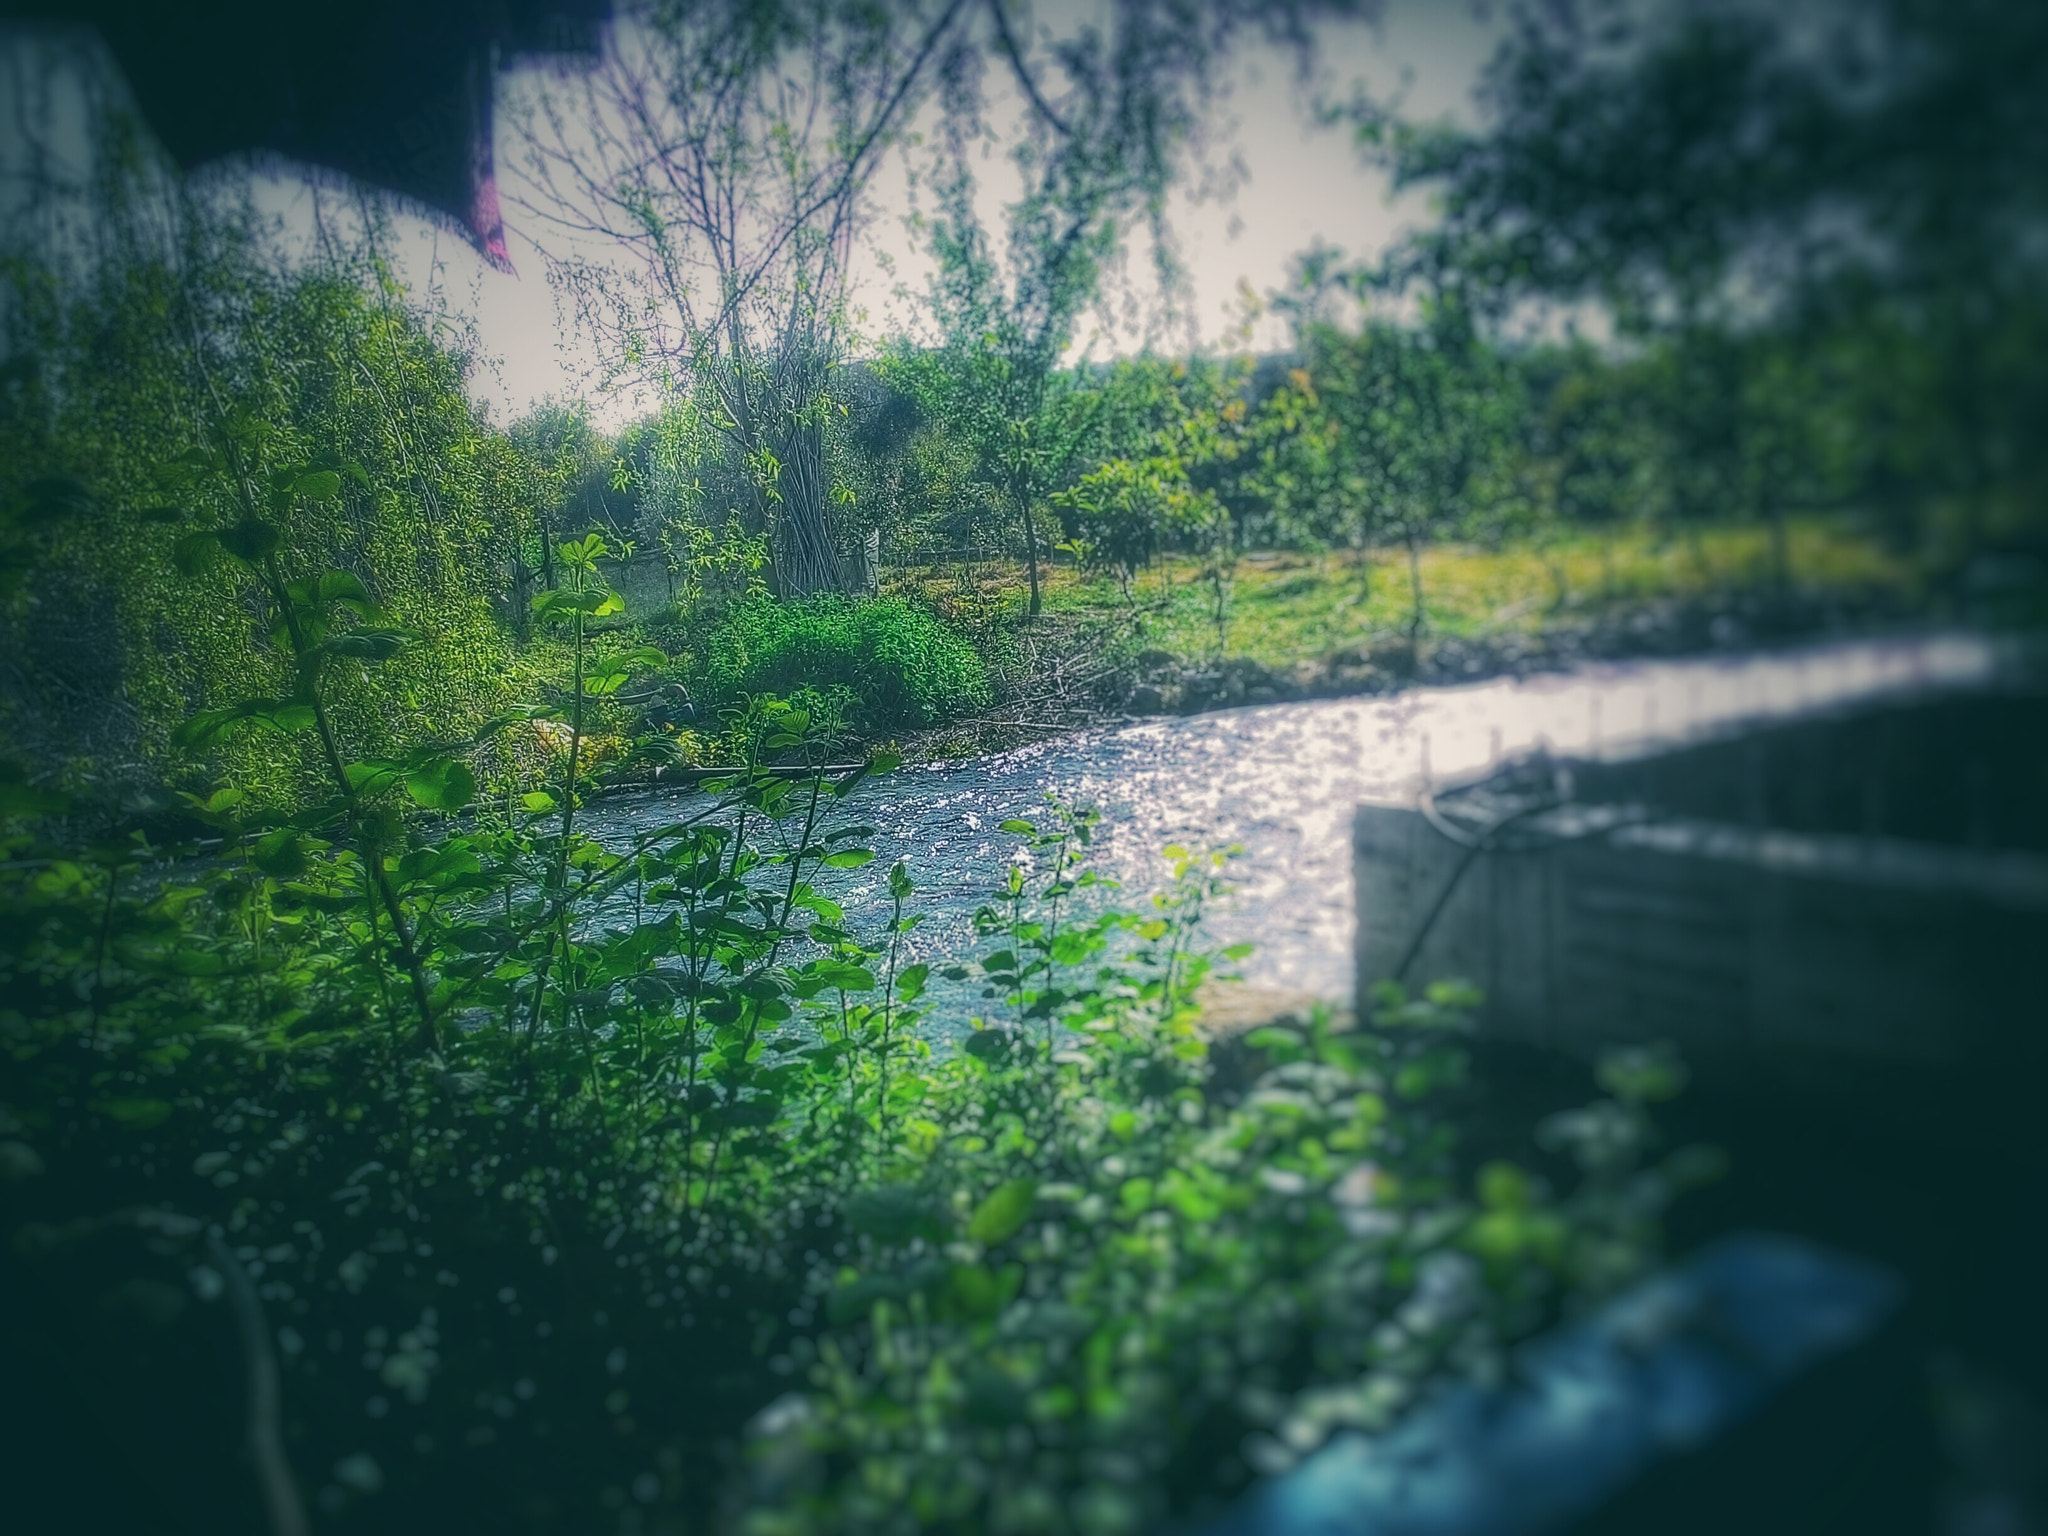 ASUS T00J-D sample photo. The river photography